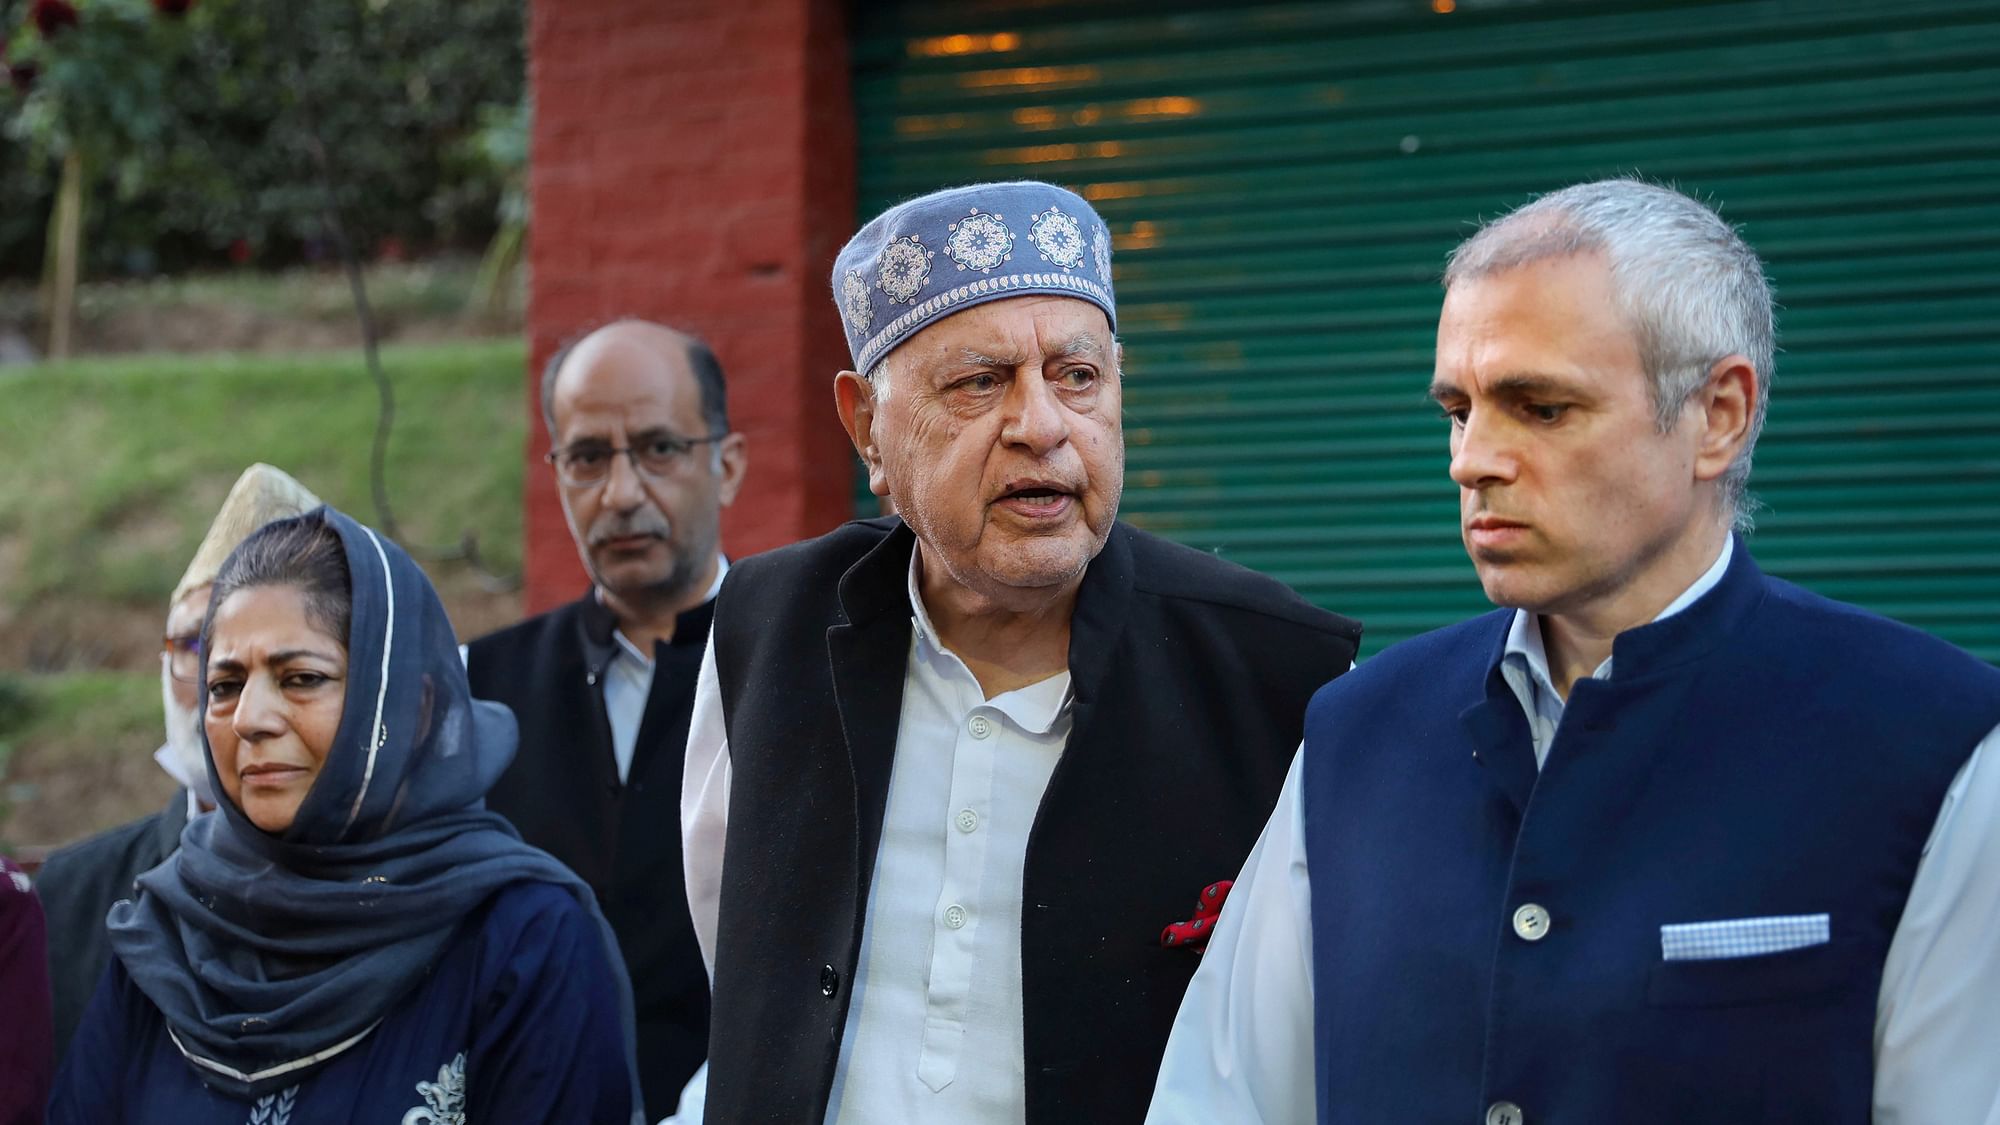 Jammu and Kashmir National Conference President Farooq Abdullah addresses a press conference along with his son Omar Abdullah, Peoples Democratic Party (PDP) President Mehbooba Mufti and others after meeting of signatories to the Gupkar declaration, at his residence in Srinagar, Thursday, 15 October, 2020. 